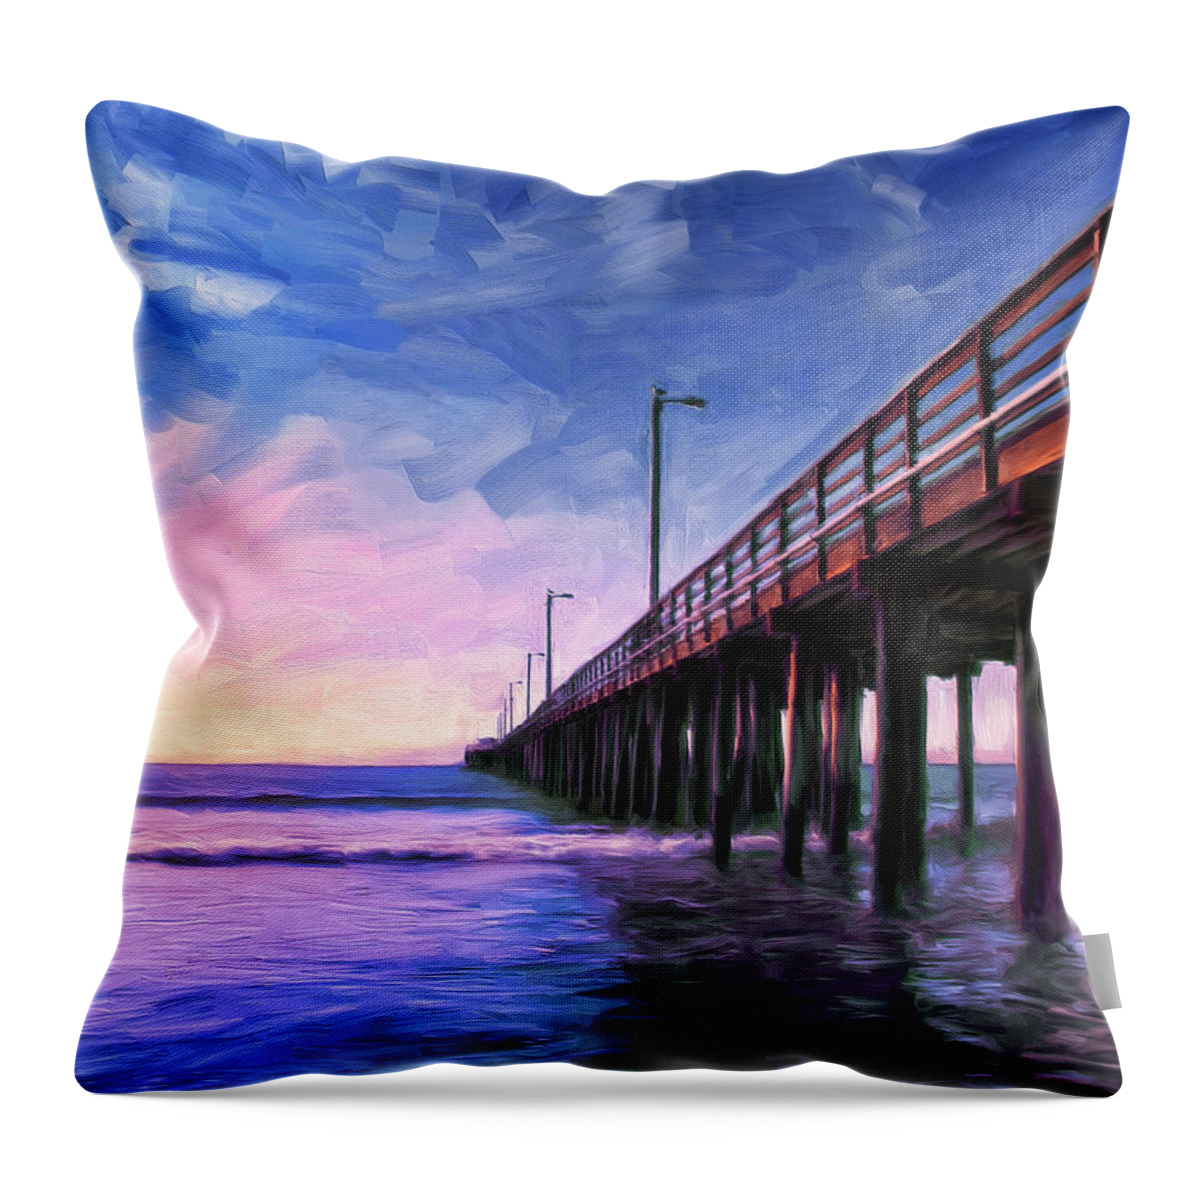 Sunset Throw Pillow featuring the painting Sunset at Avila Beach by Dominic Piperata